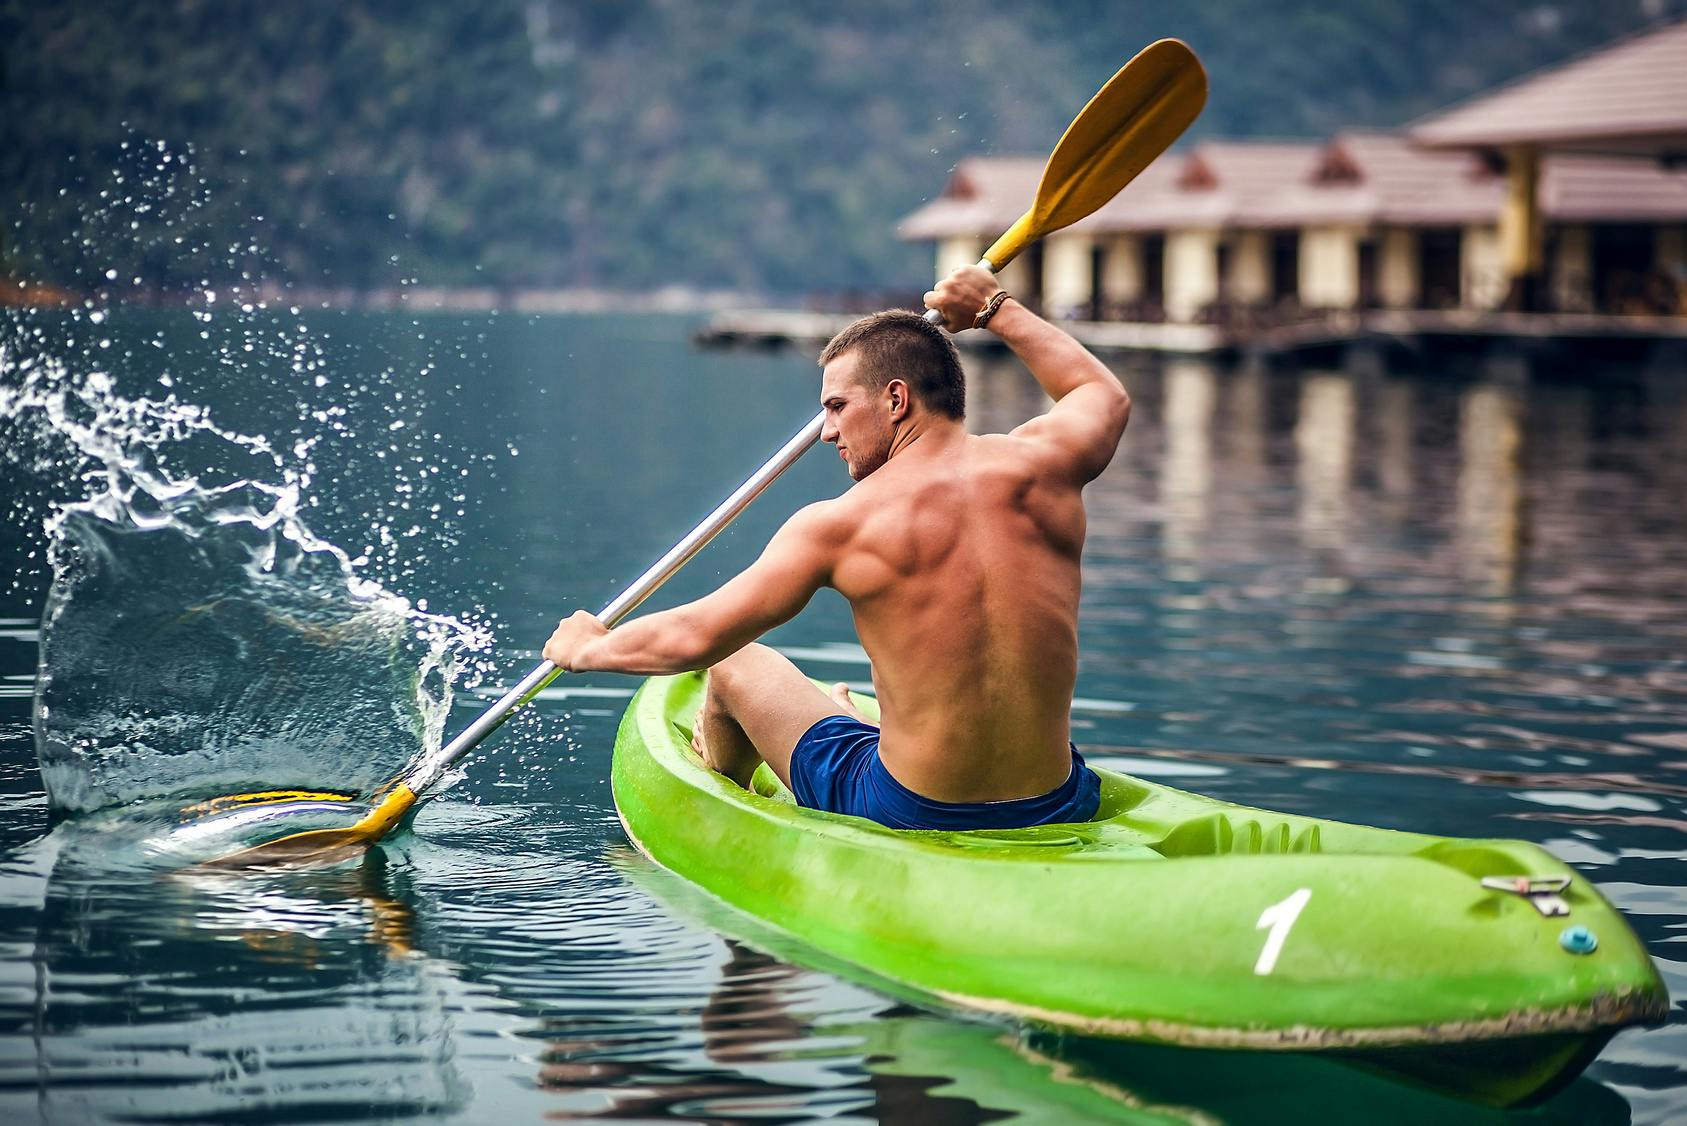 What muscles does kayaking work?